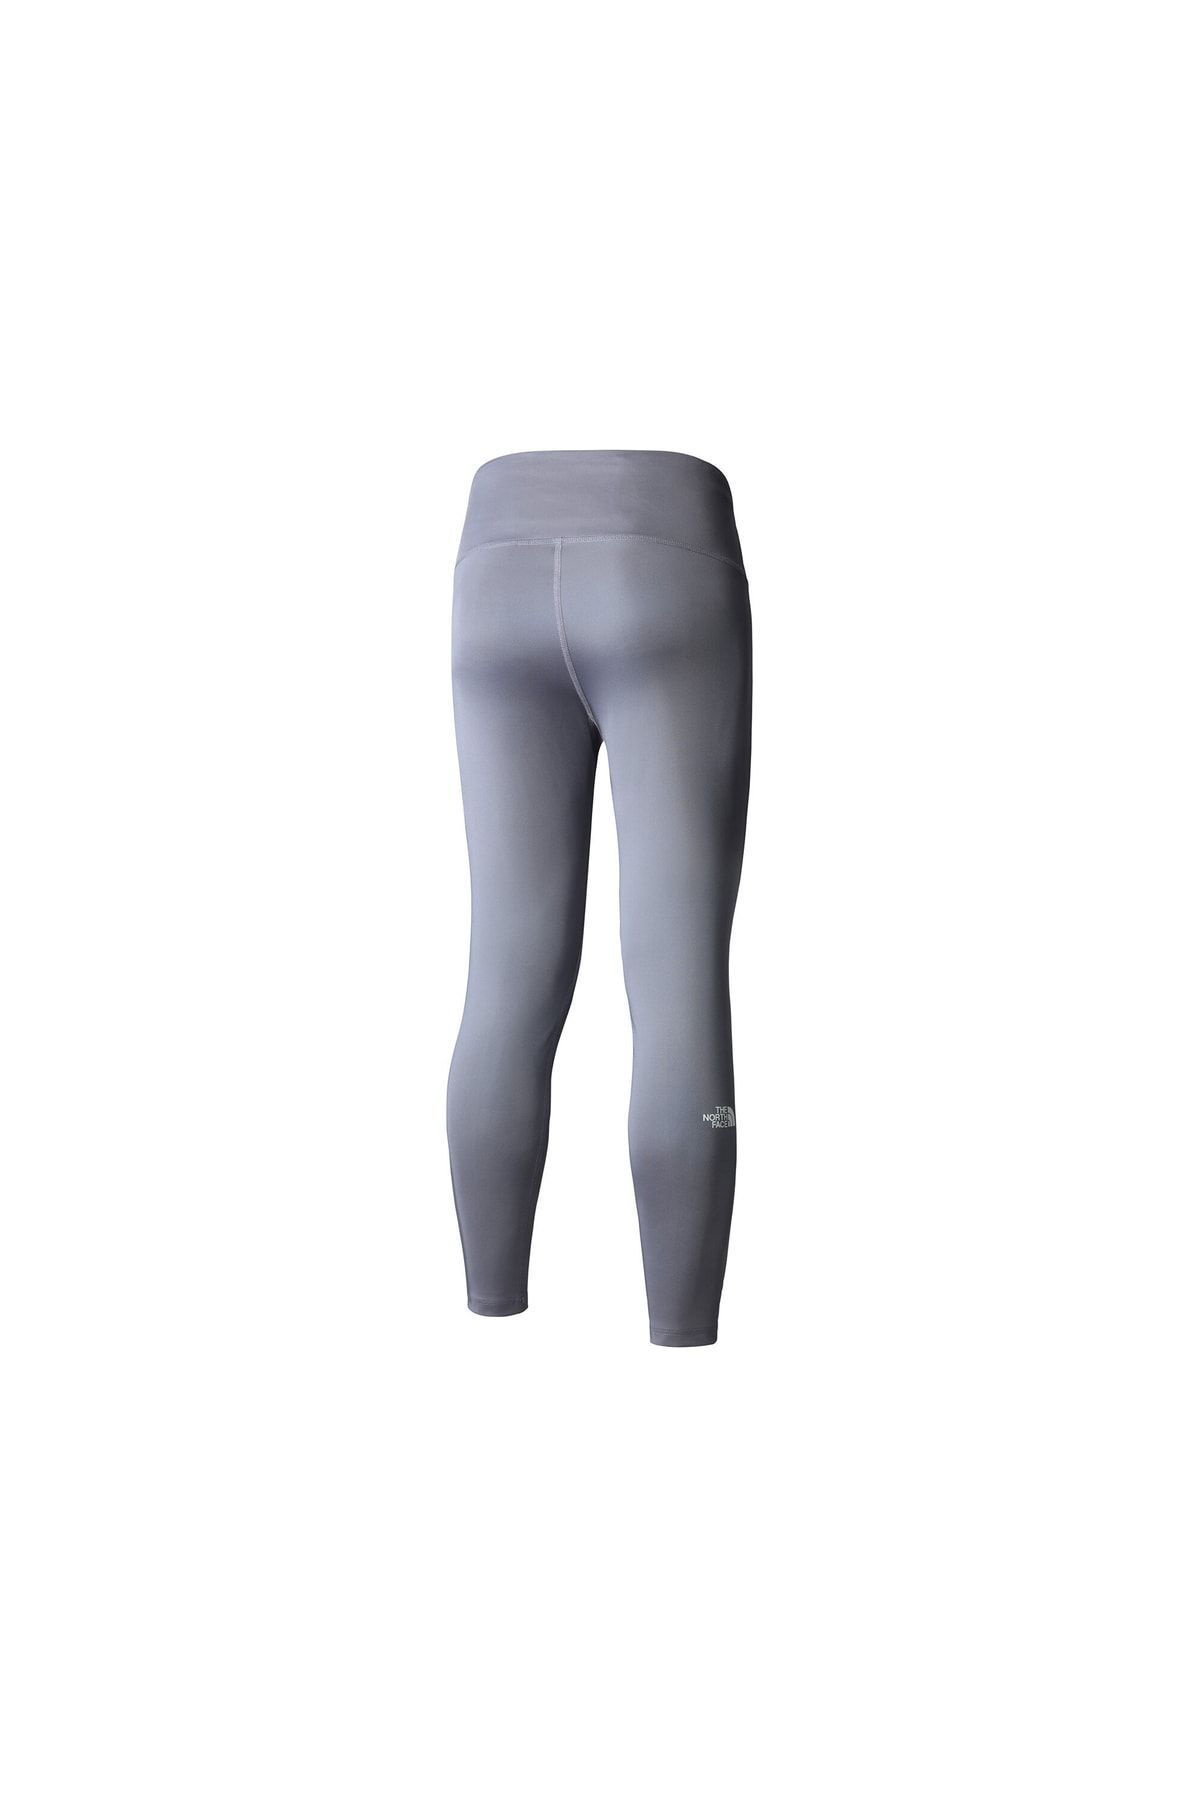 The North Face W Flex High Rise 7/8 Tight Women's High Waisted